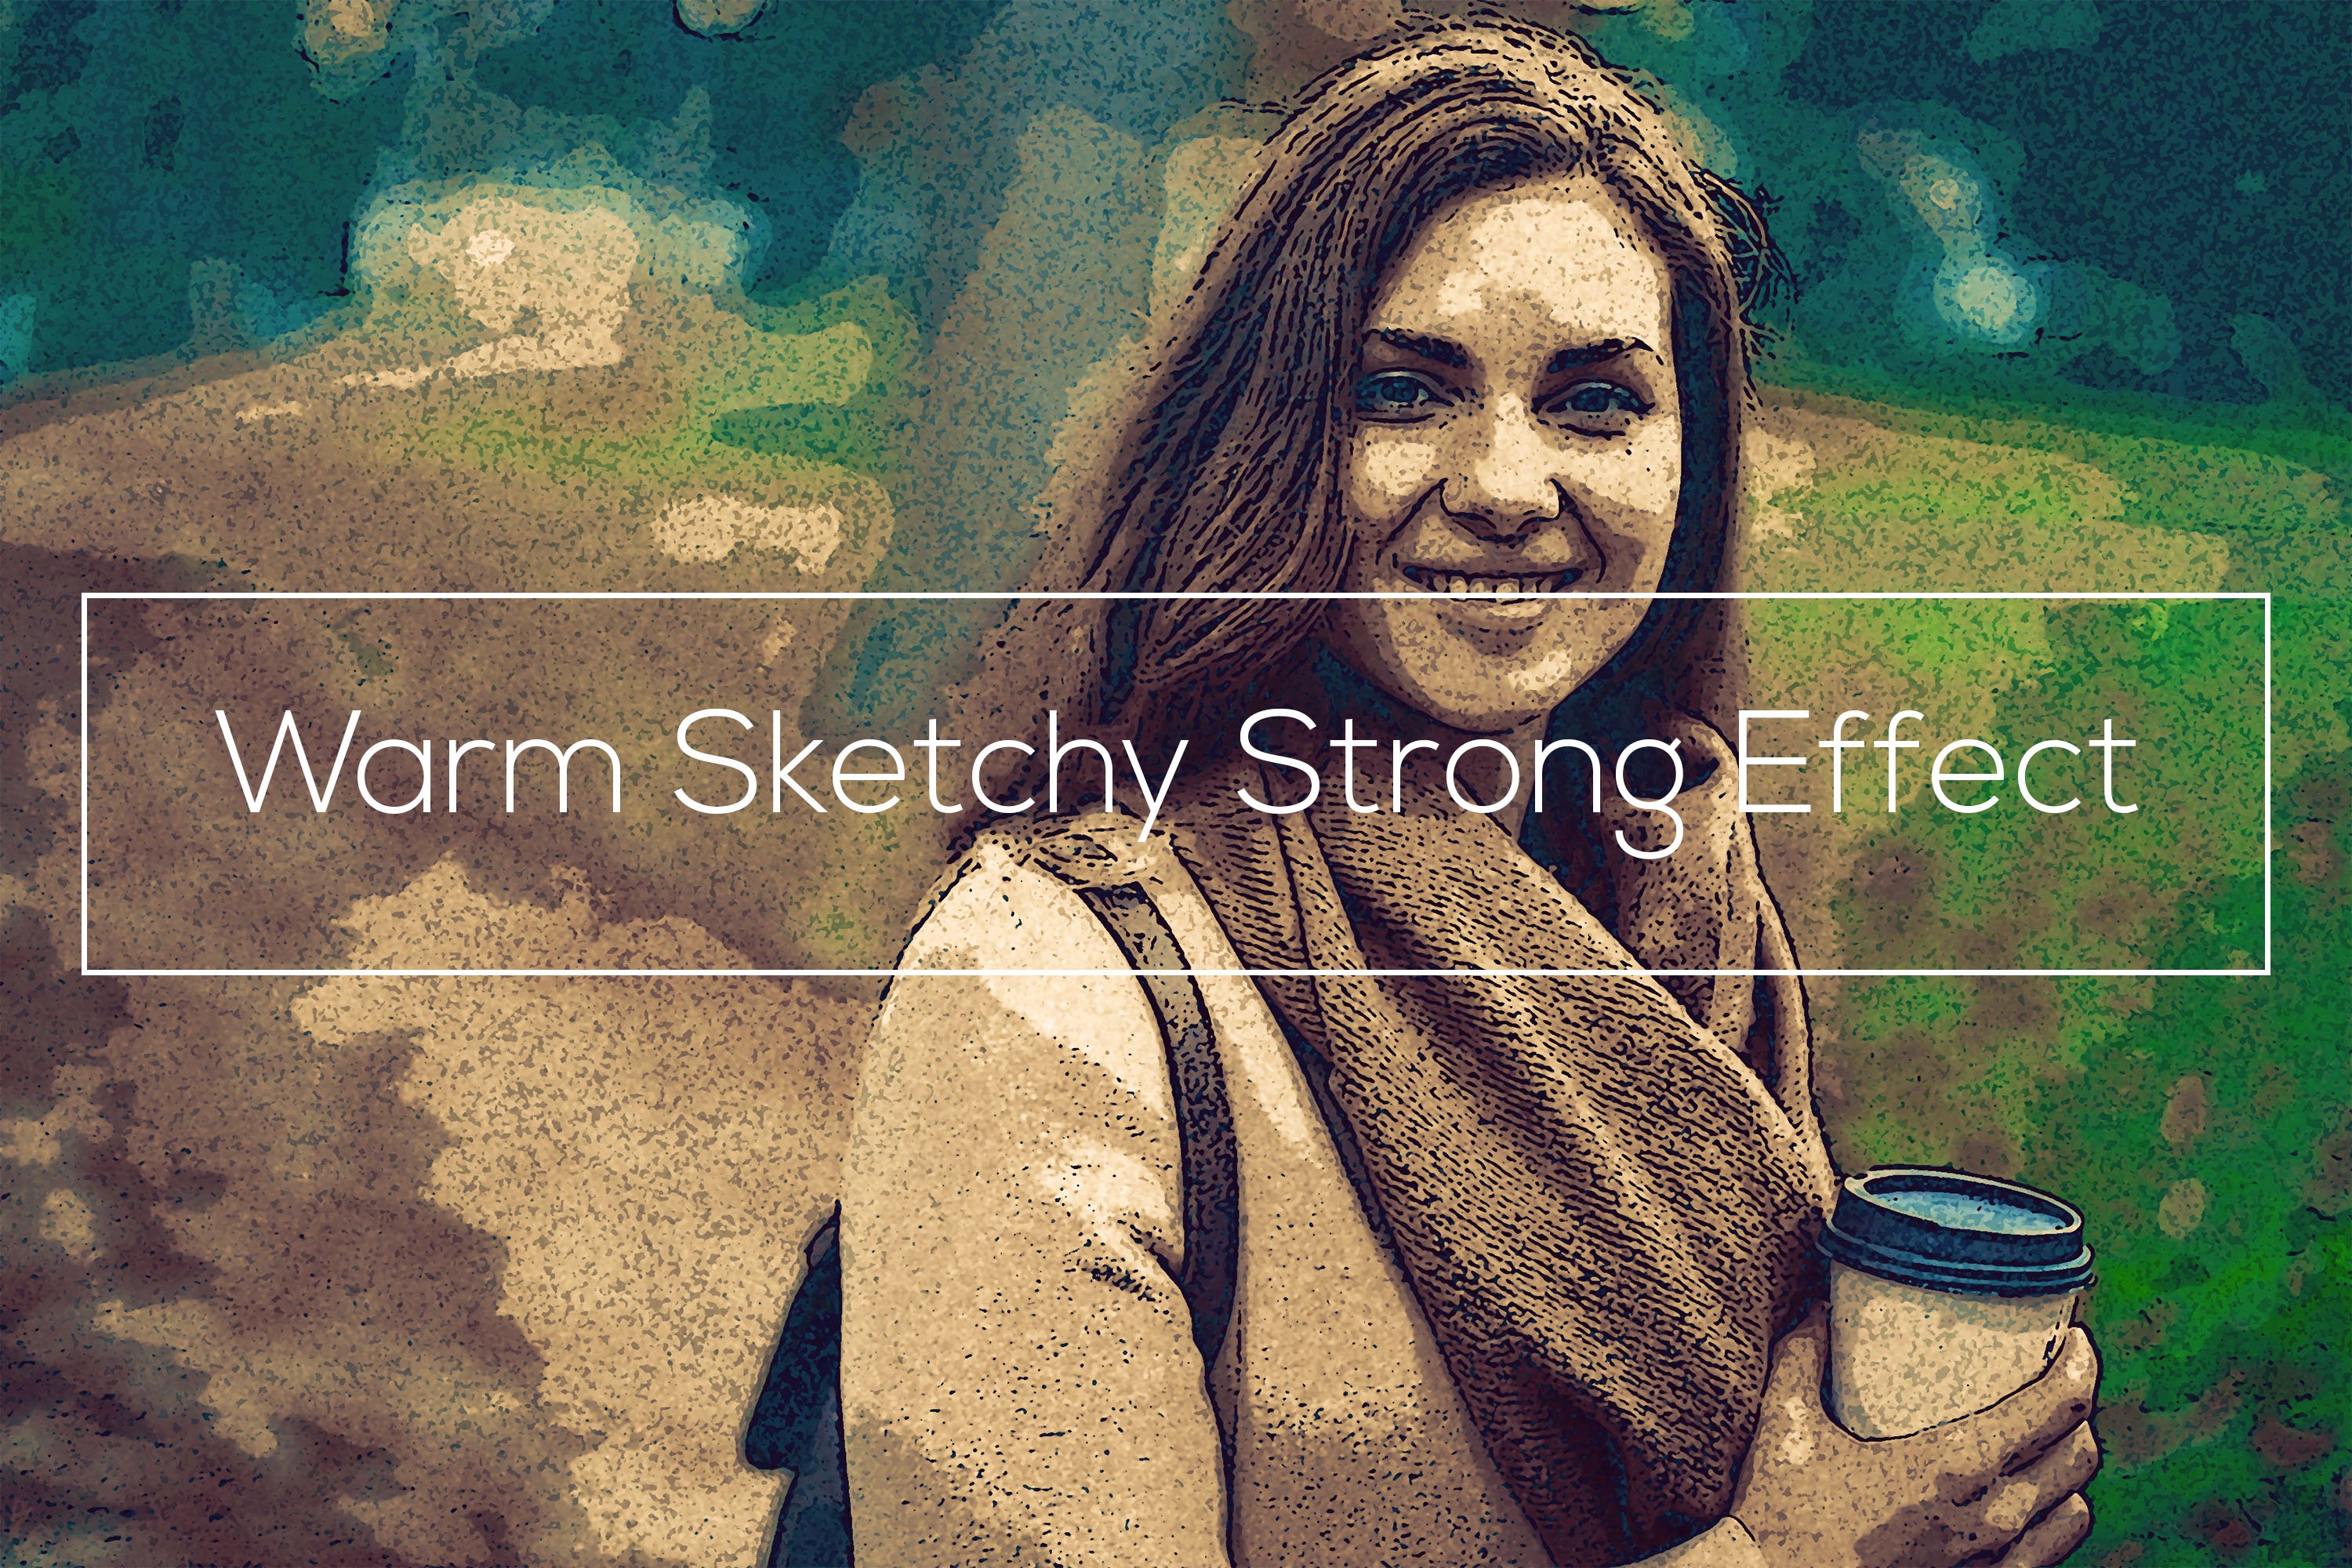 Warm Sketchy Strong Effectcover image.